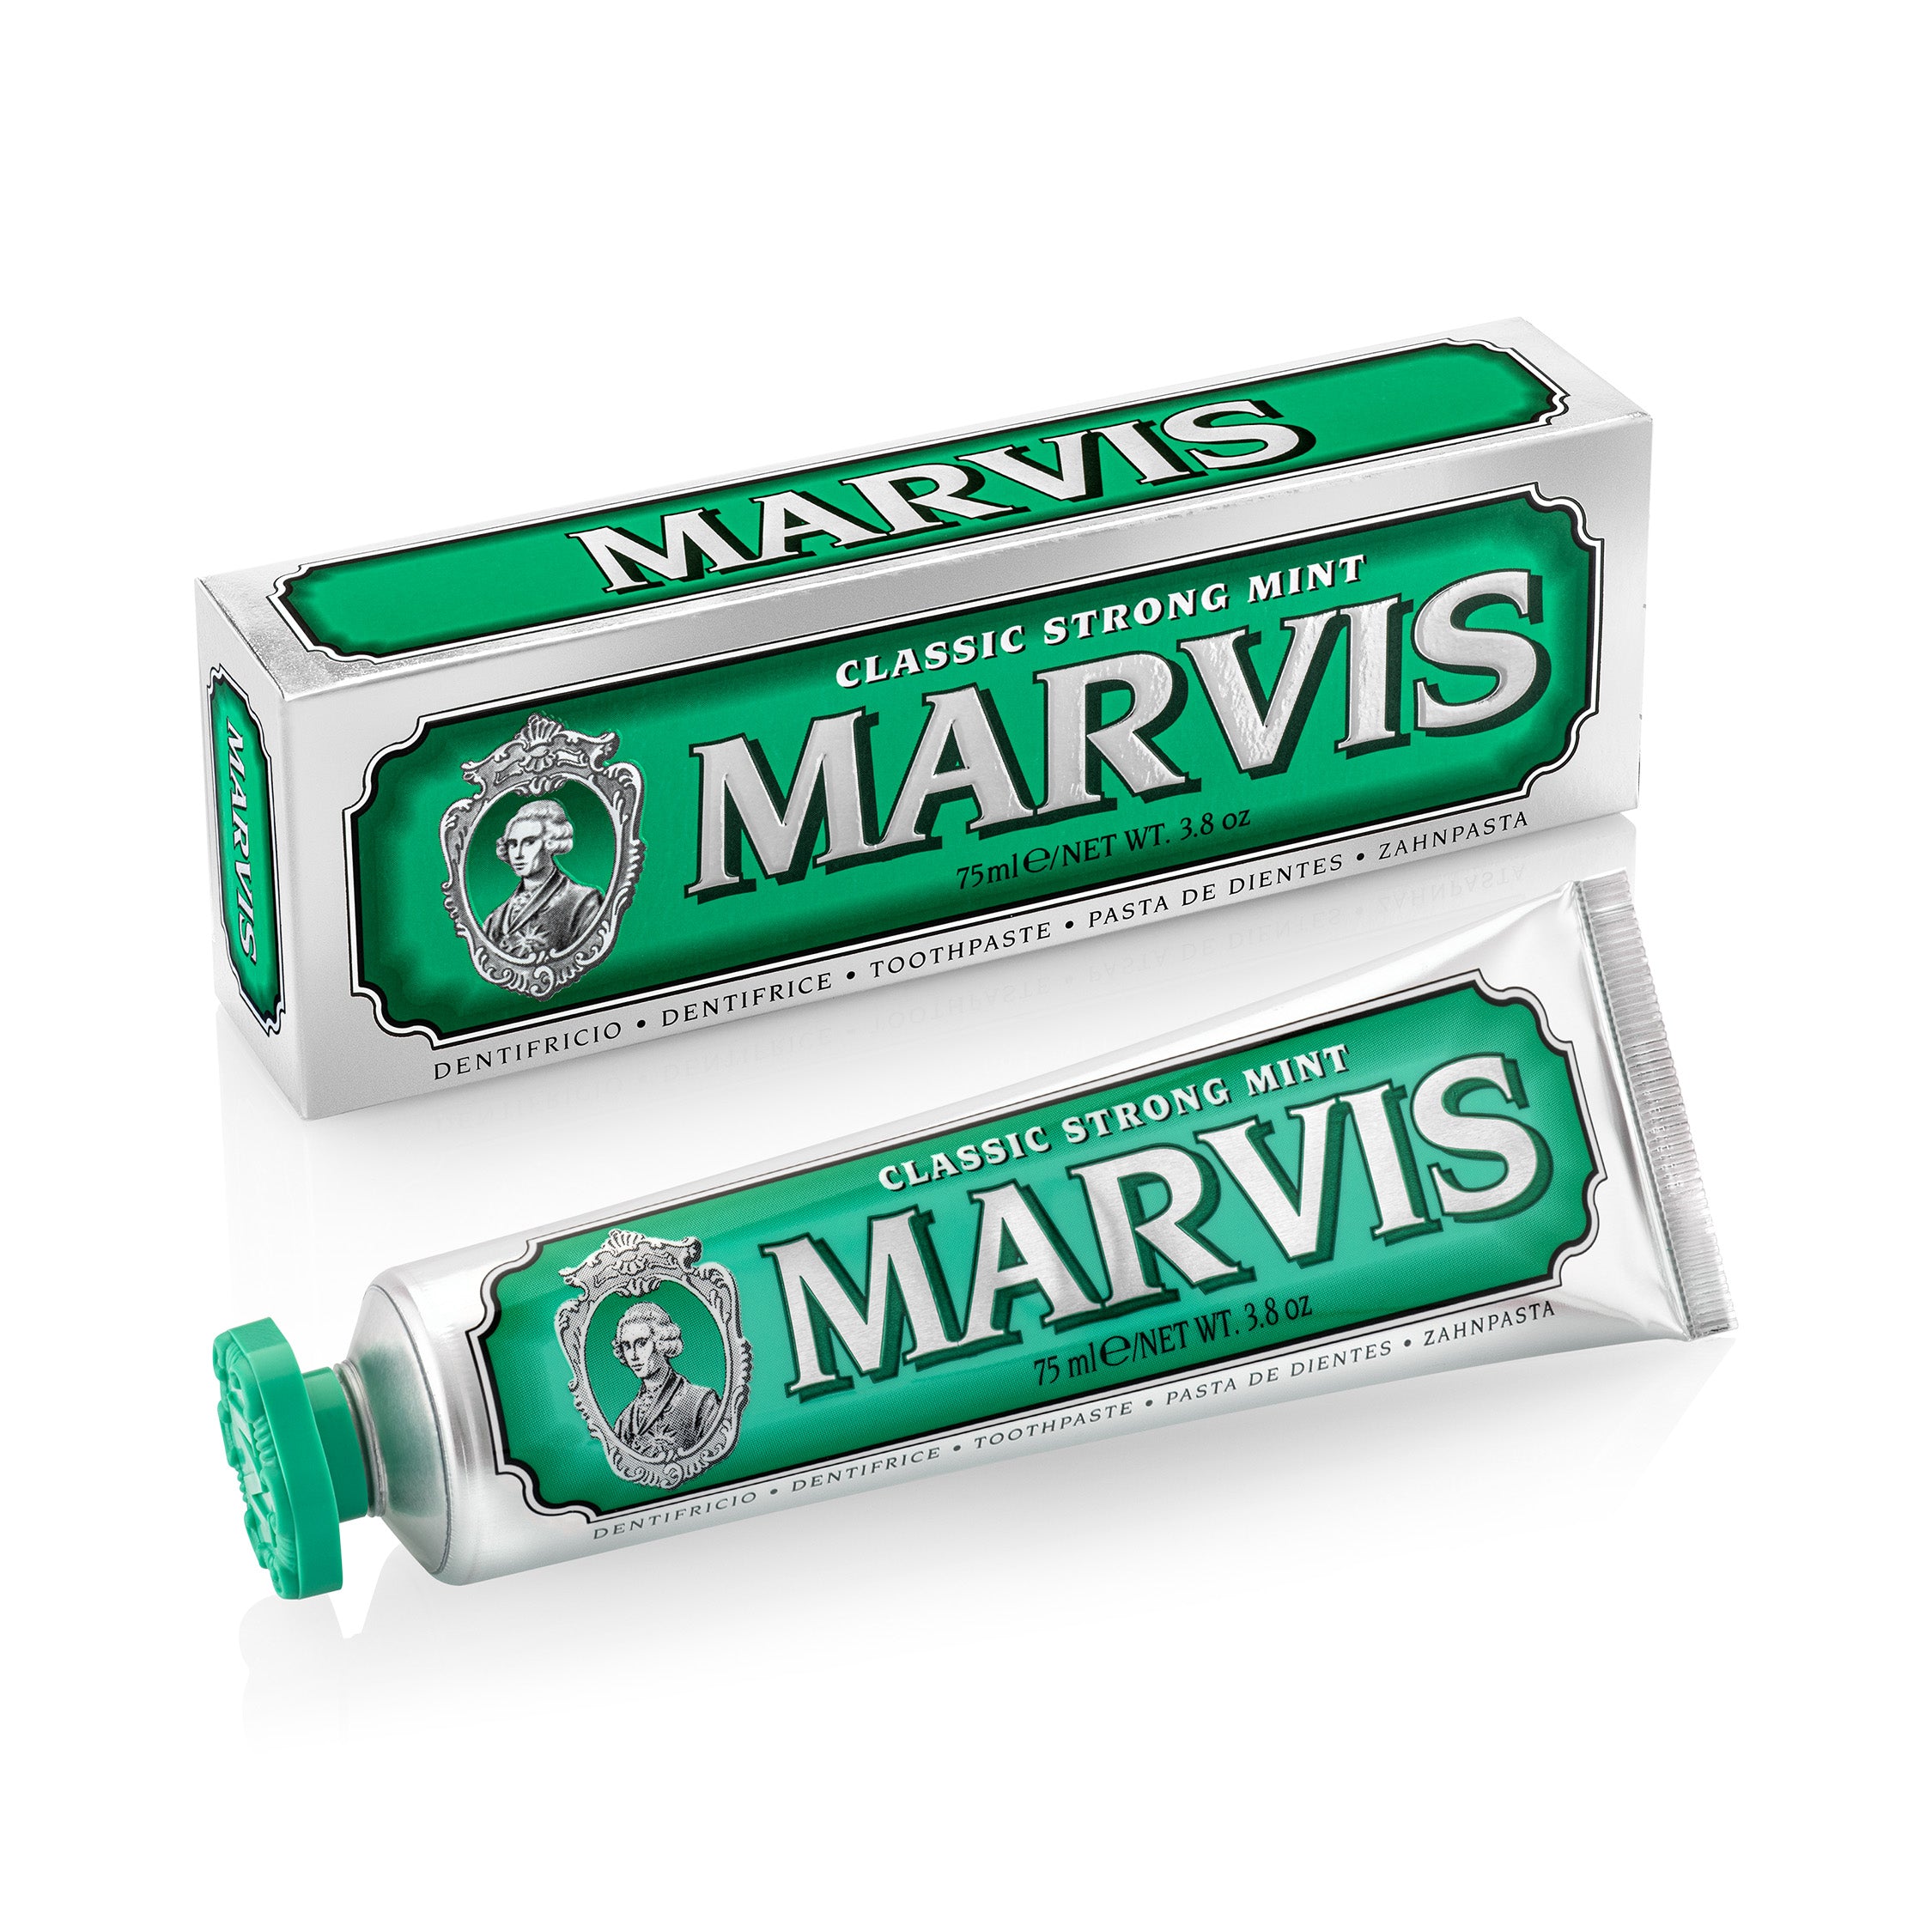 MARVIS Flavor with Holder クラシックストロング・ミント - MARVIS